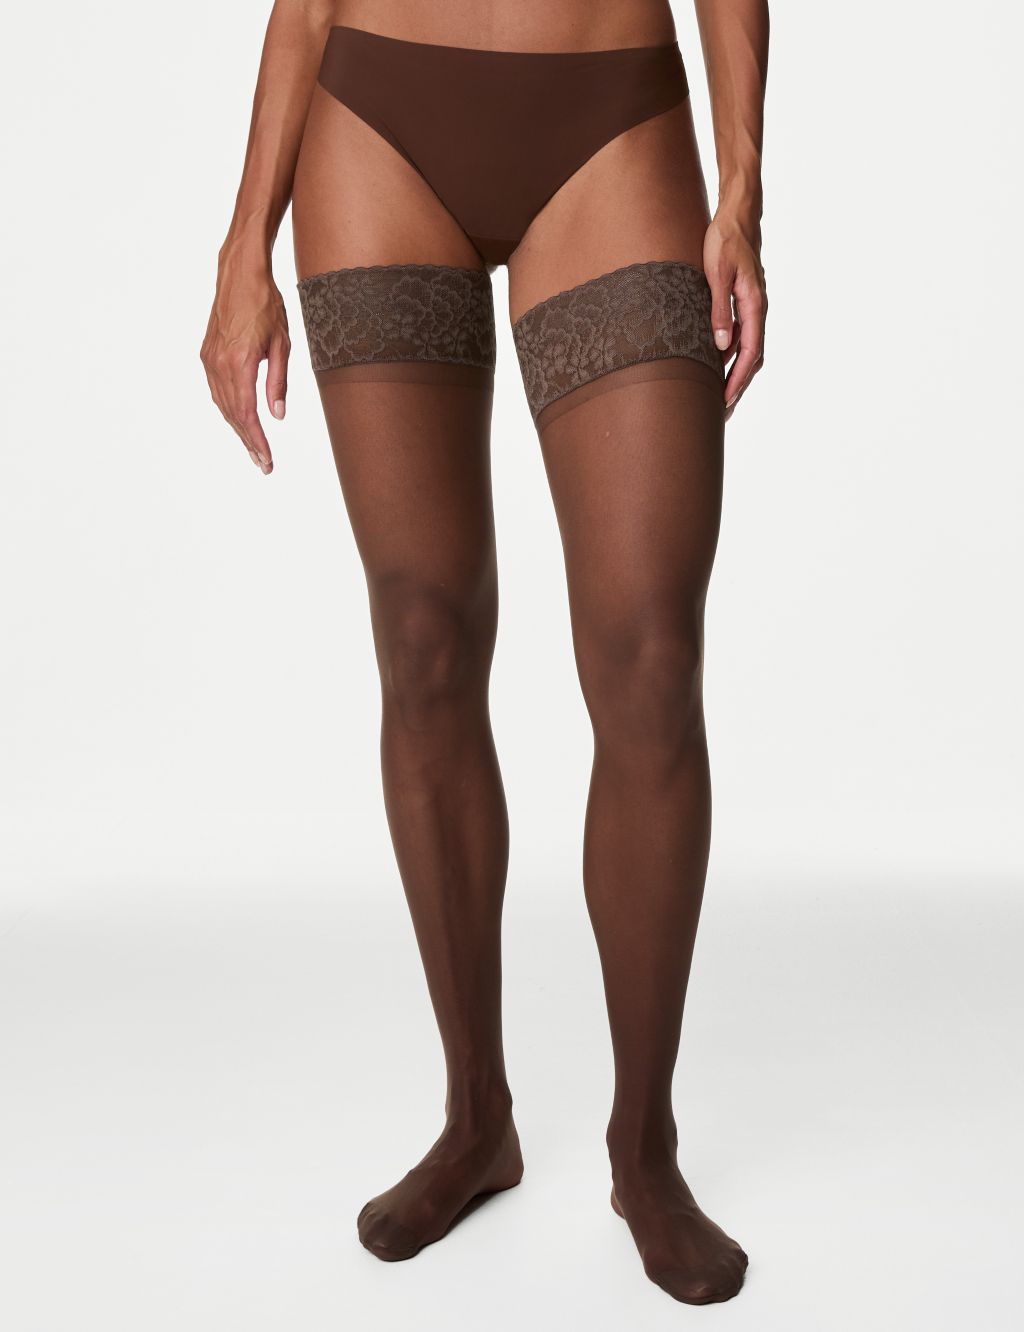 MARKS & SPENCER Bare Cooling Oiled Look Tights Nude Medium 7 Denier £4.00 -  PicClick UK